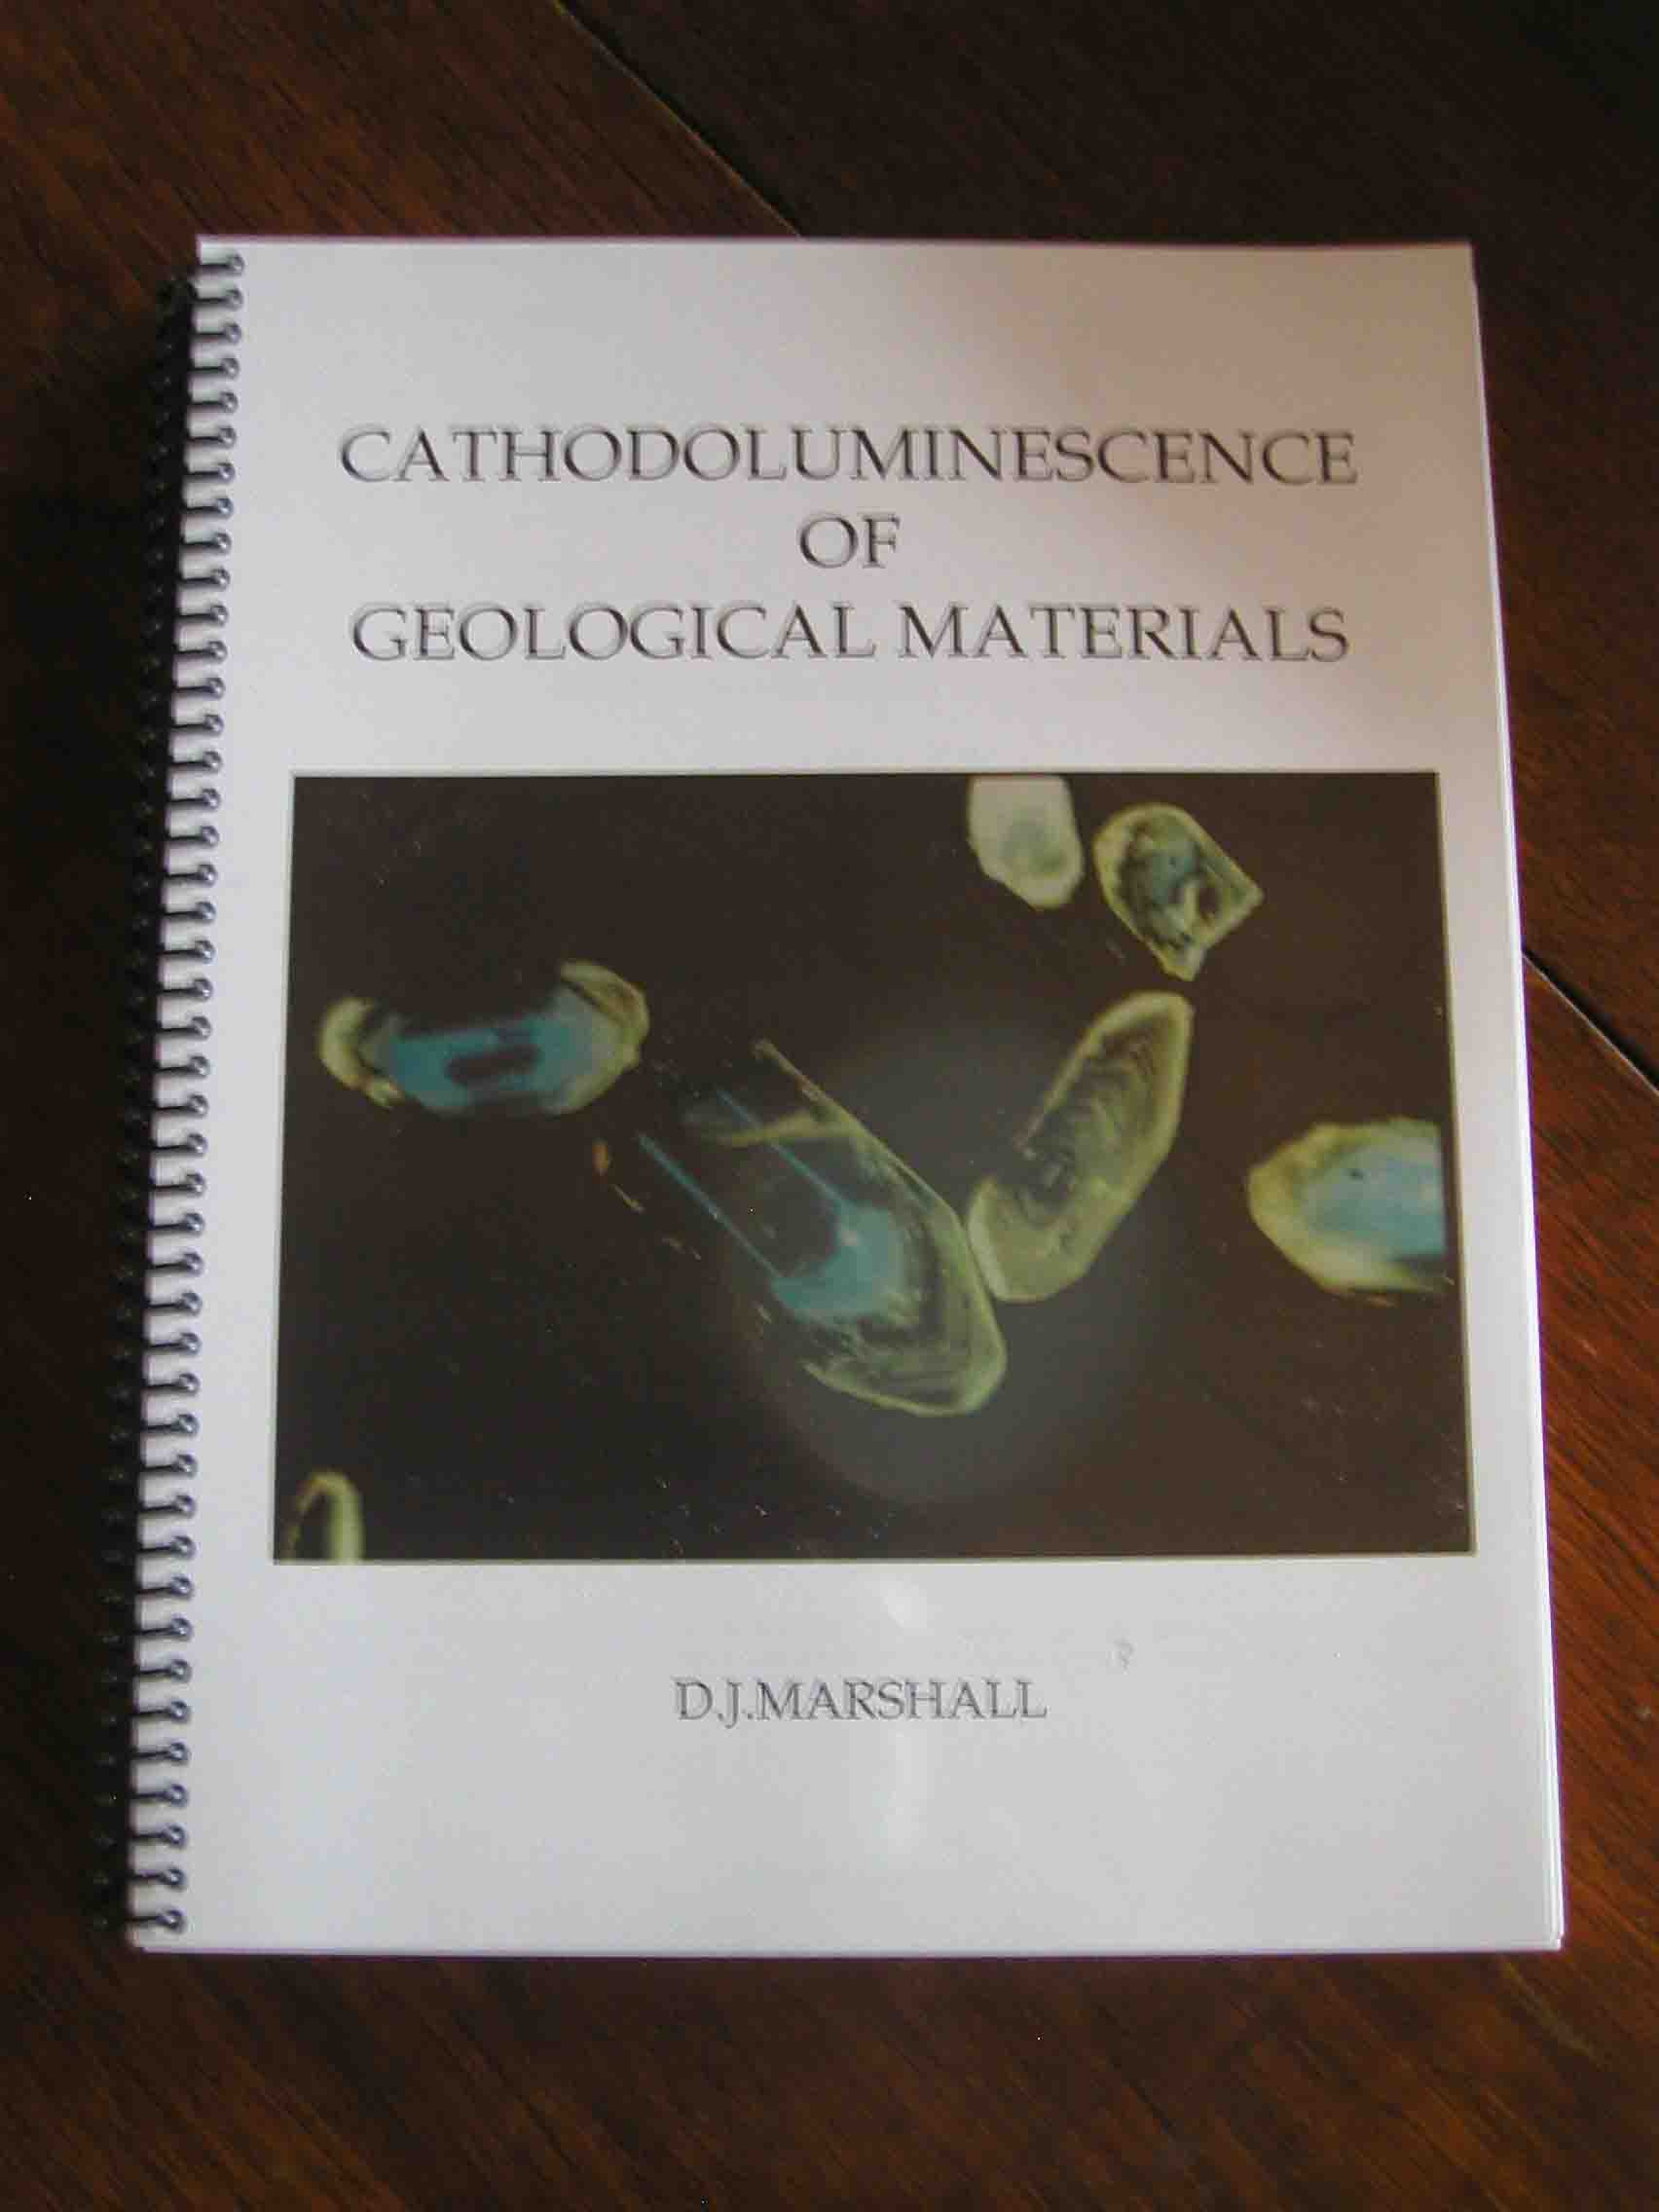 Donald Marshall Cathodoluminescence of Geological Materials textbook book CL reference